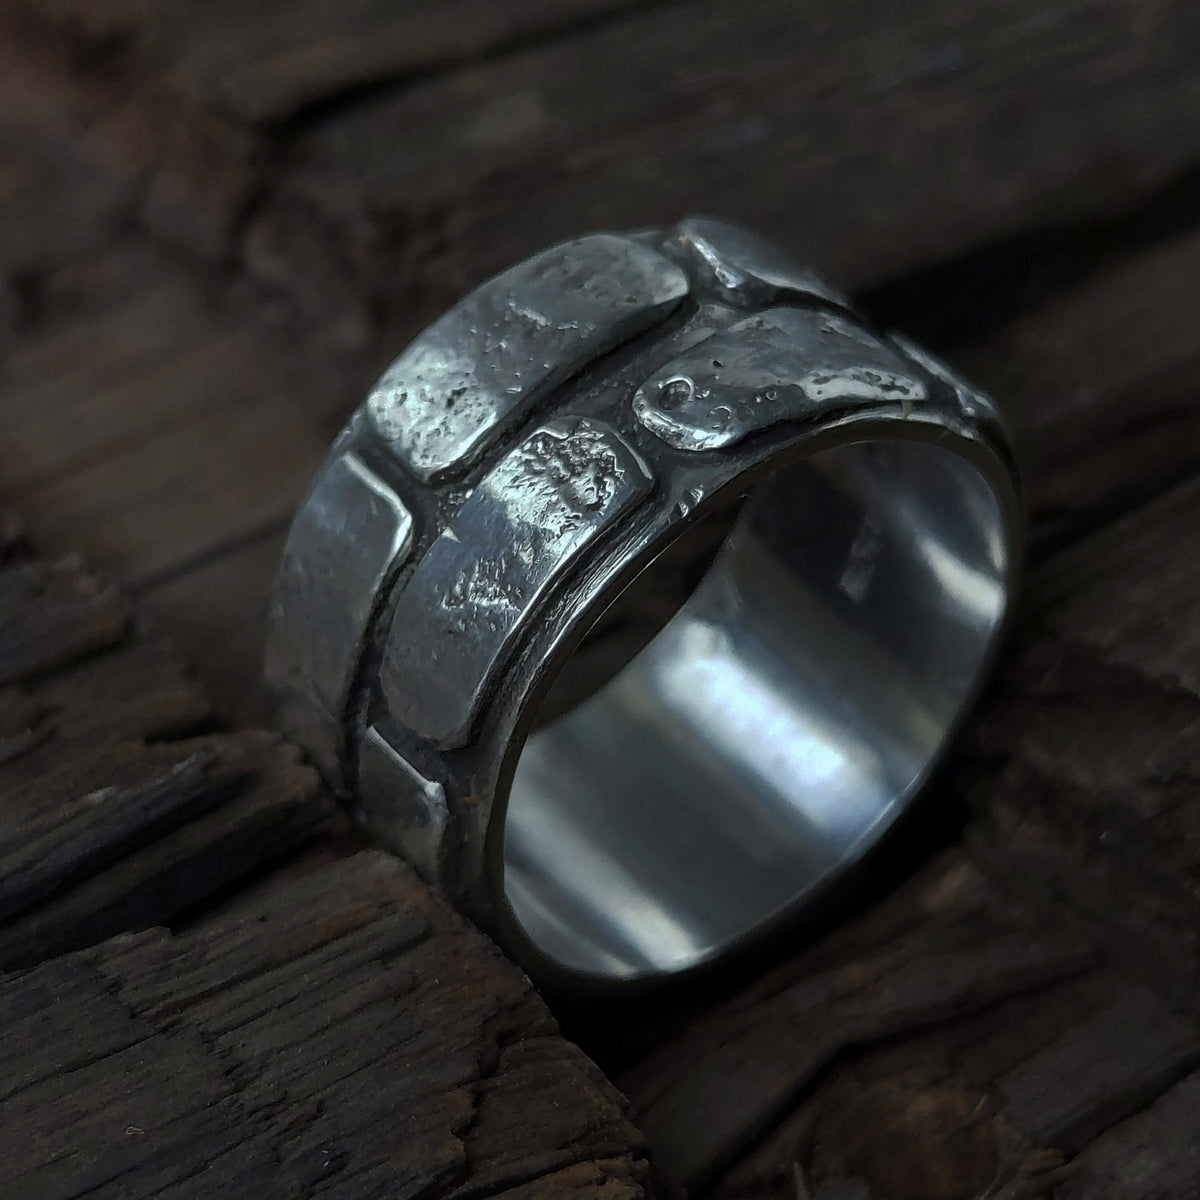 brick and mortar jewelry ring, handcrafted silver ring, unisex, by roff jewellery